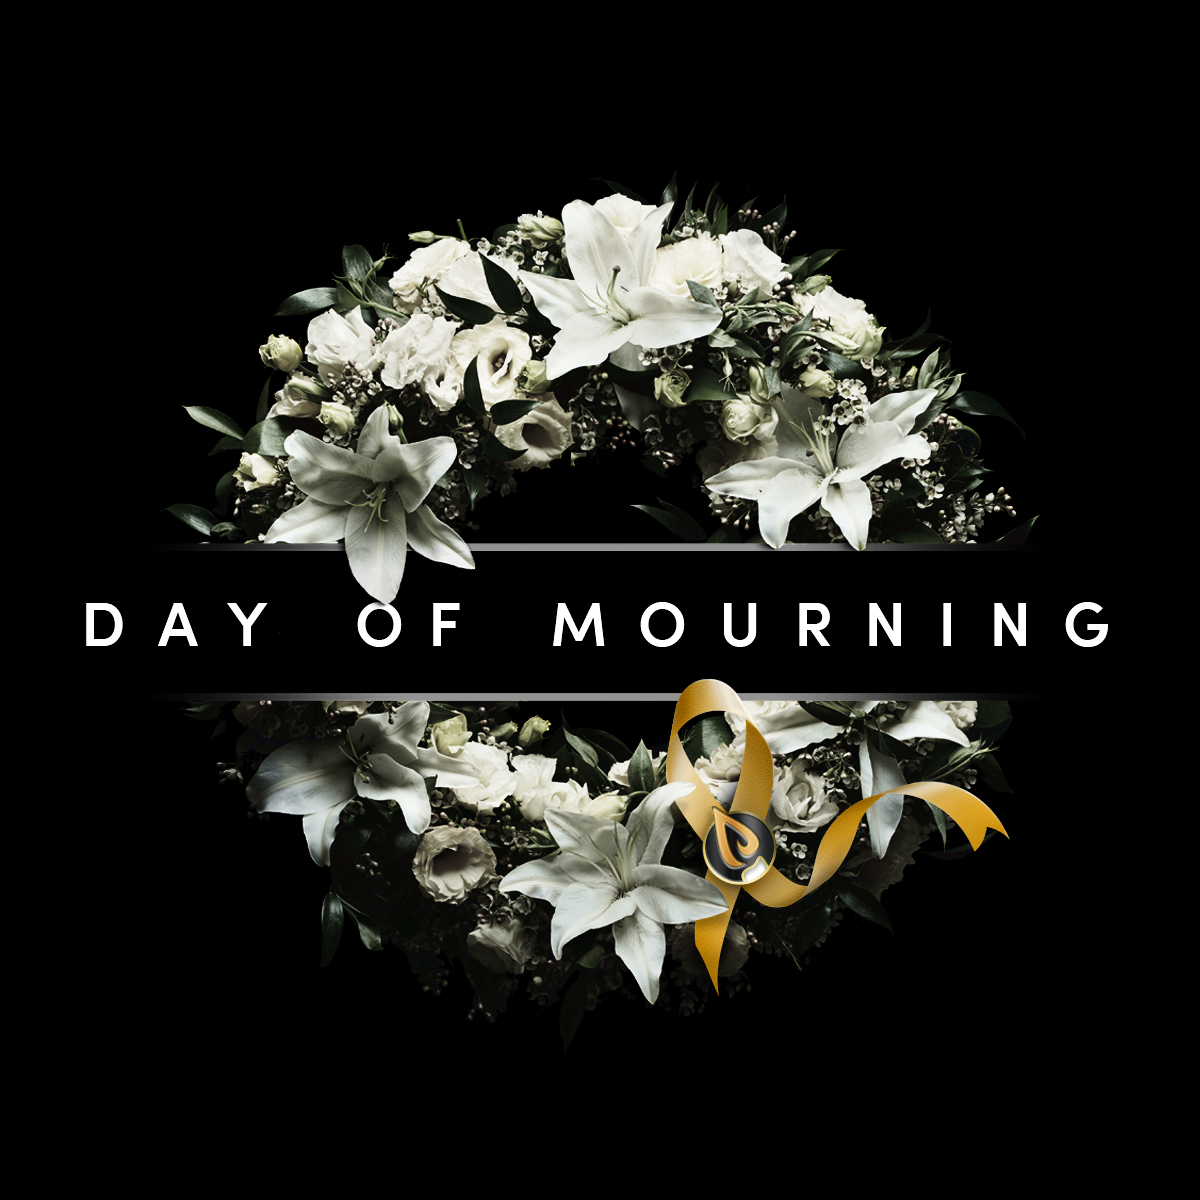 On this #DayOfMourning, let's come together to remember, reflect, and recommit ourselves to building safer workplaces where tragedies are prevented, not mourned.